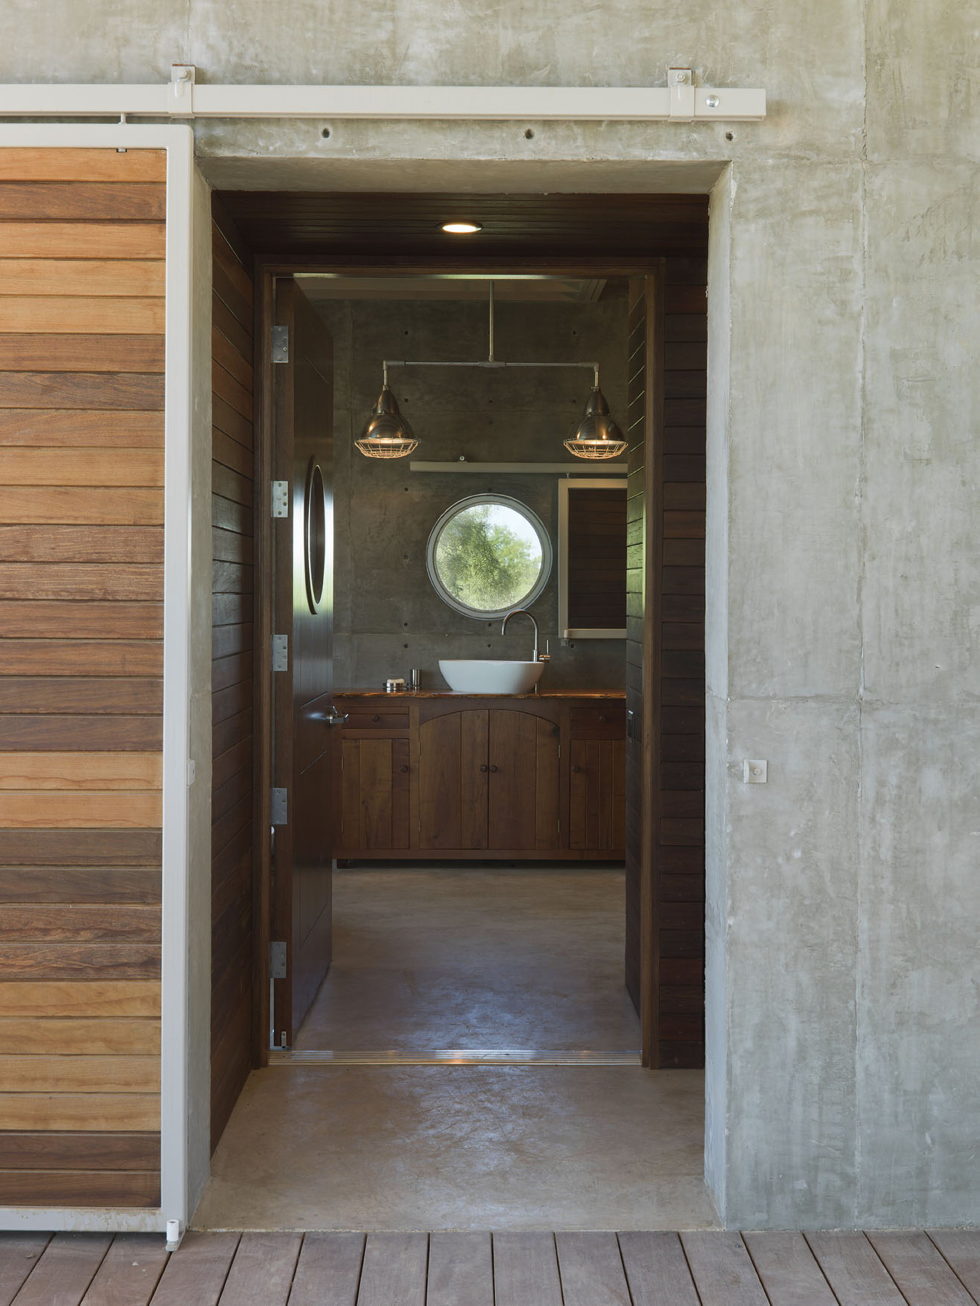 The House Made Of Aluminum Trailer In Texas From Andrew Hinman Architecture 14